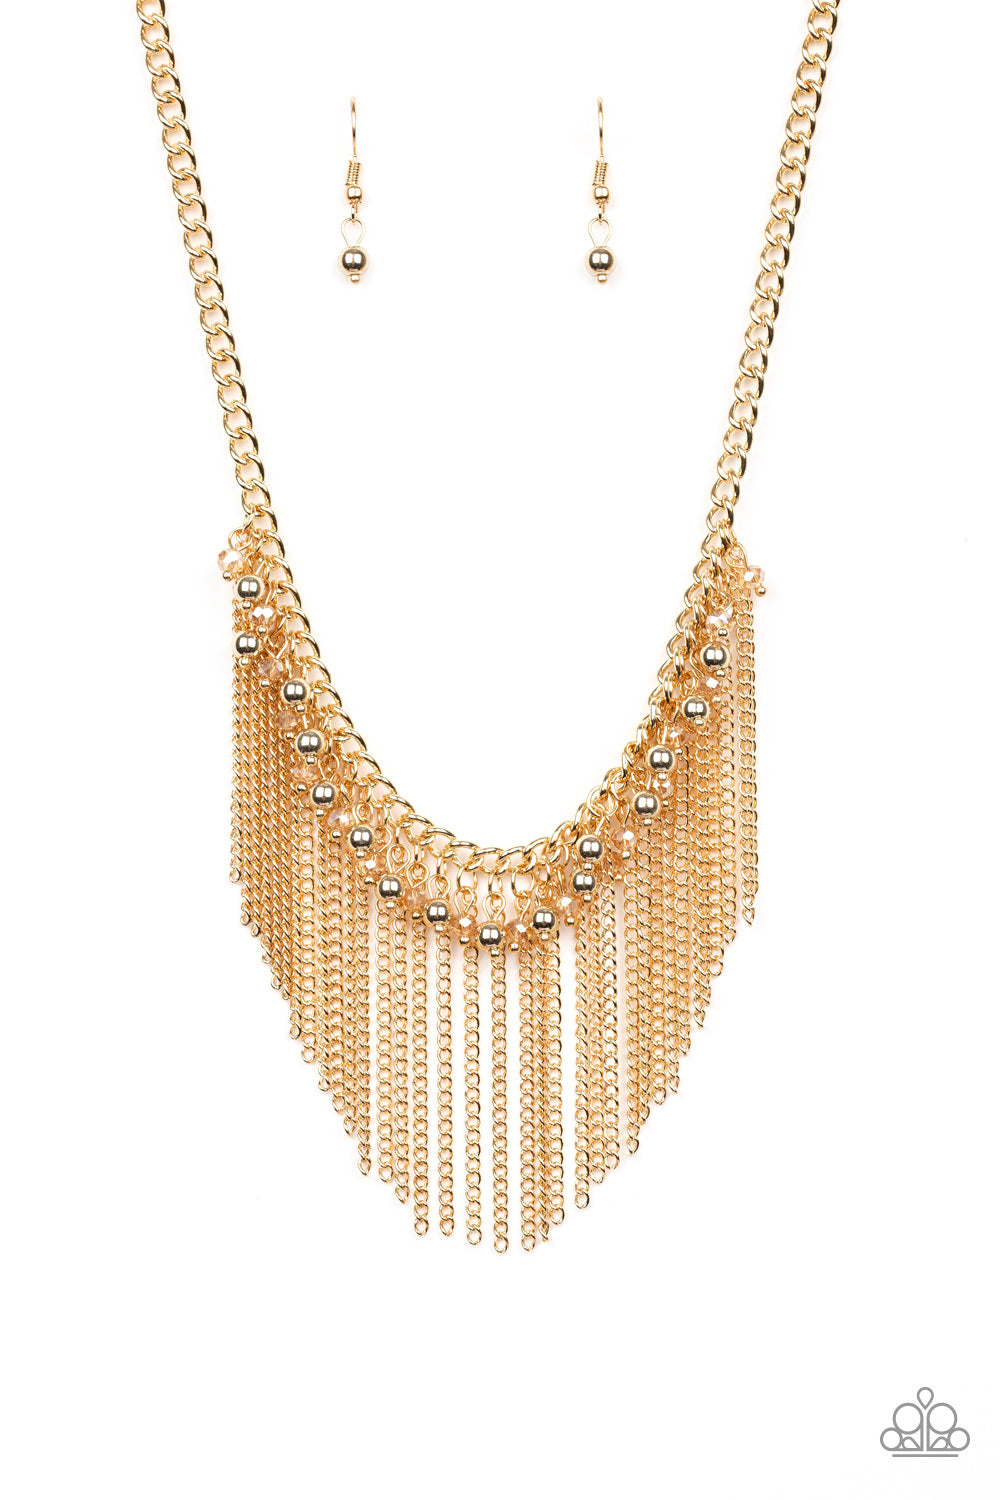 . Divinely Diva - Gold Necklace